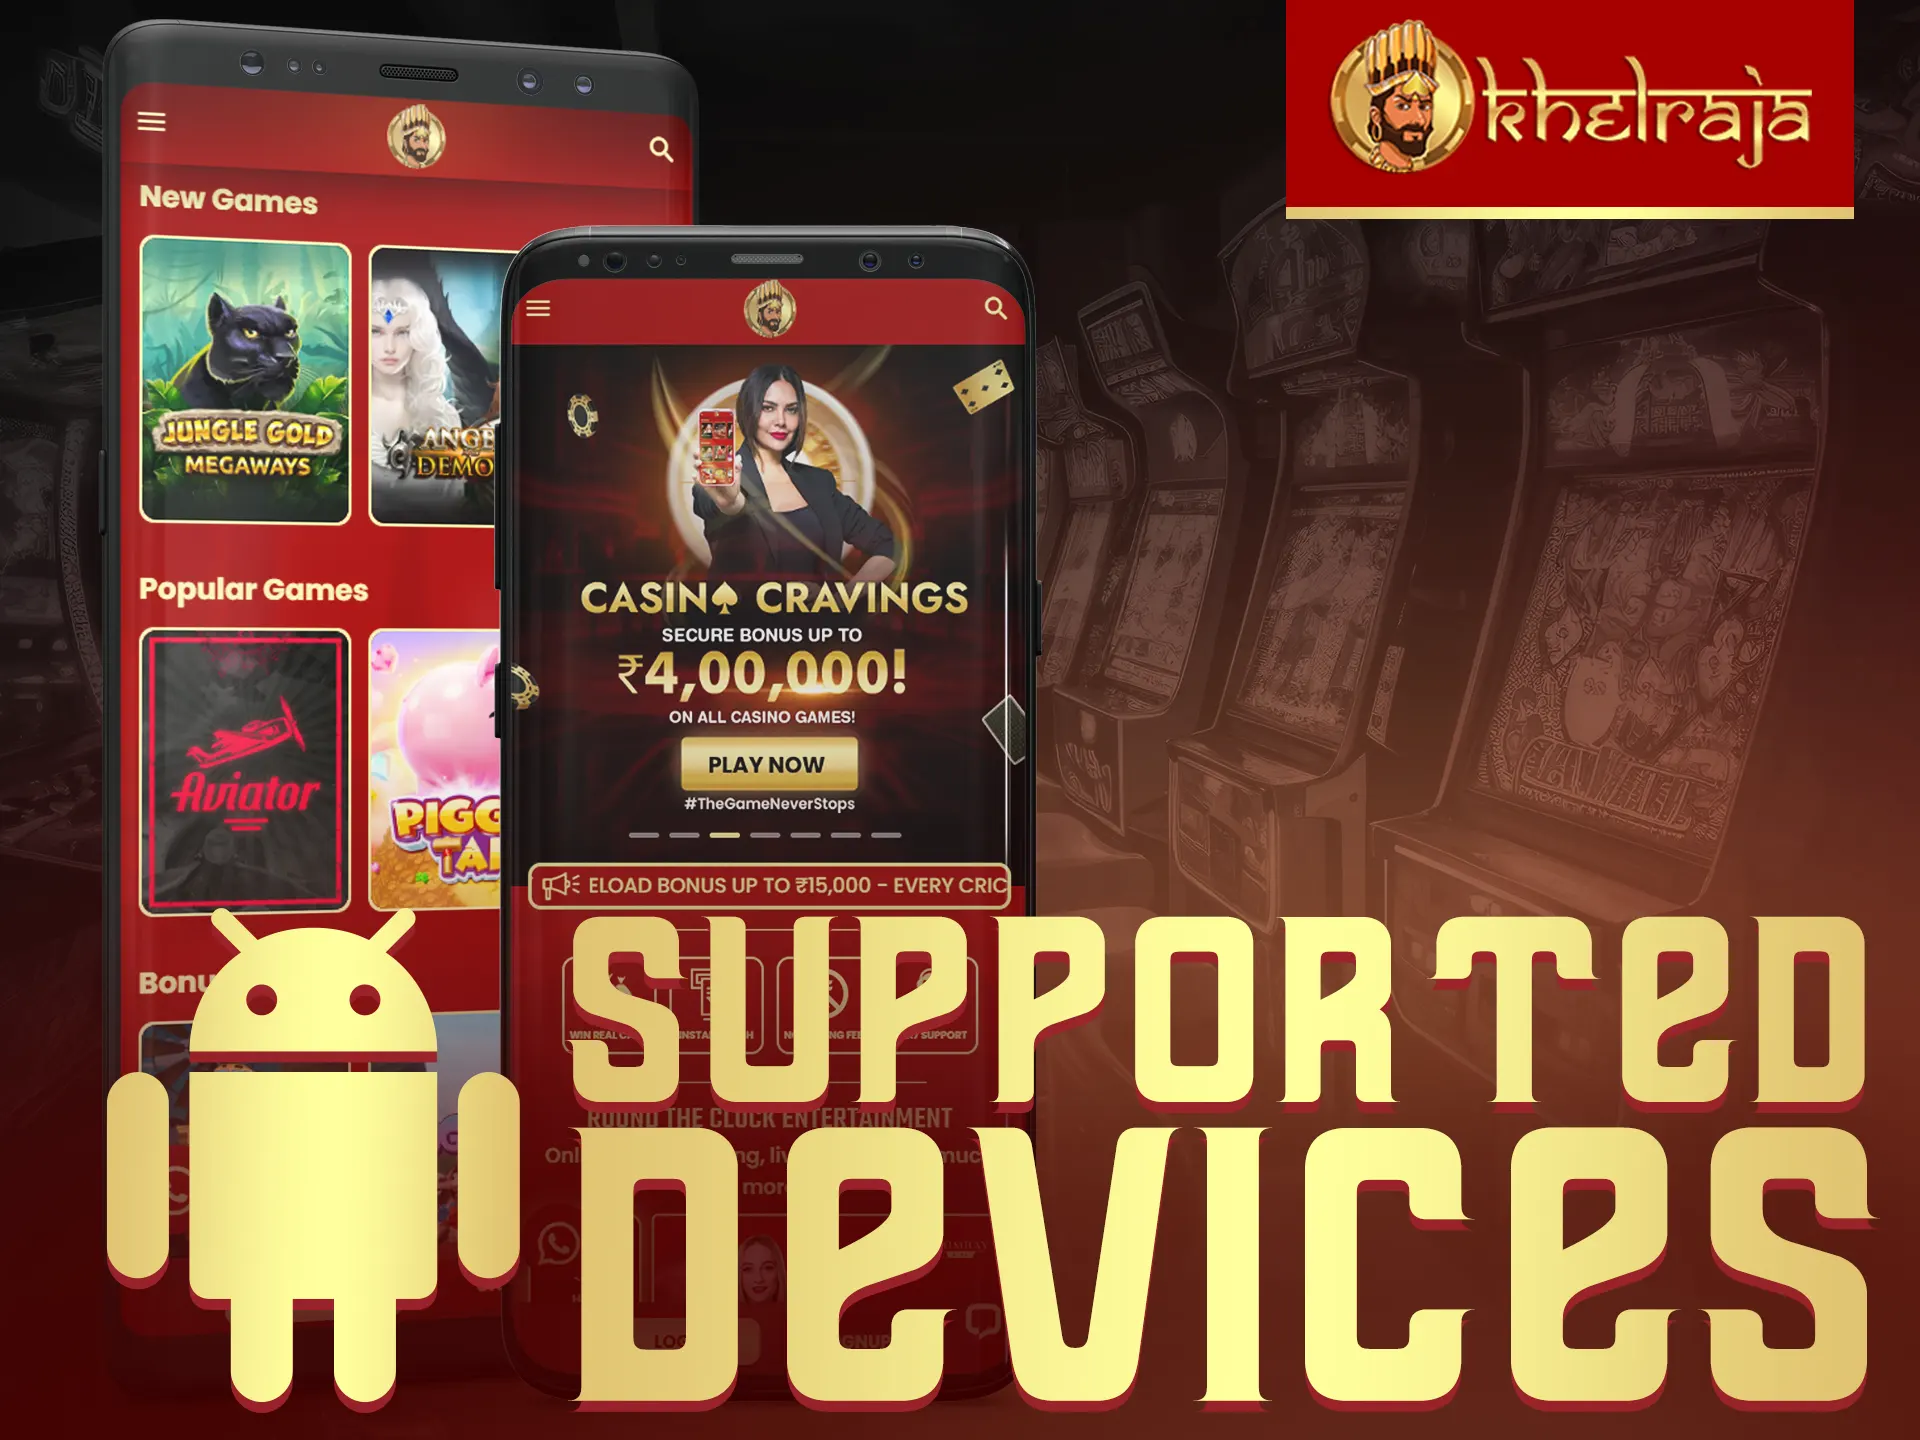 Khelraja app supports popular Android smartphones.